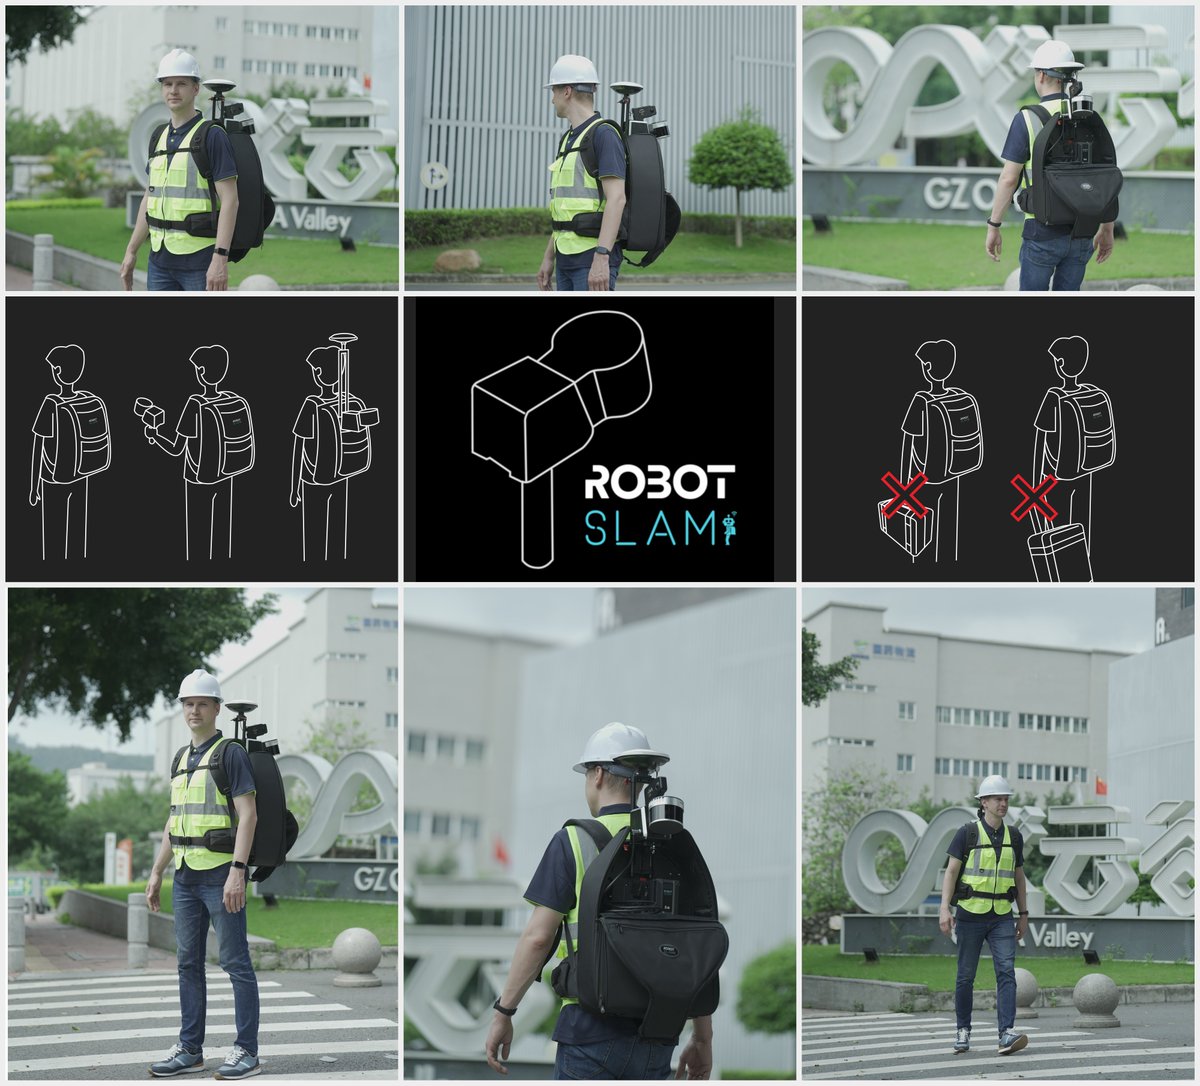 RobotSLAM professional edition, Backpack 3-in-1 Magic.
There are 2 types of backpack mount kits in the world market. The first one is RobotSLAM Backpack exclusive, and the rest is OTHERS.
For all other backpack mount kits, it’s just a kit.

#SOUTH #RobotSLAM #Backpack #survey #3D